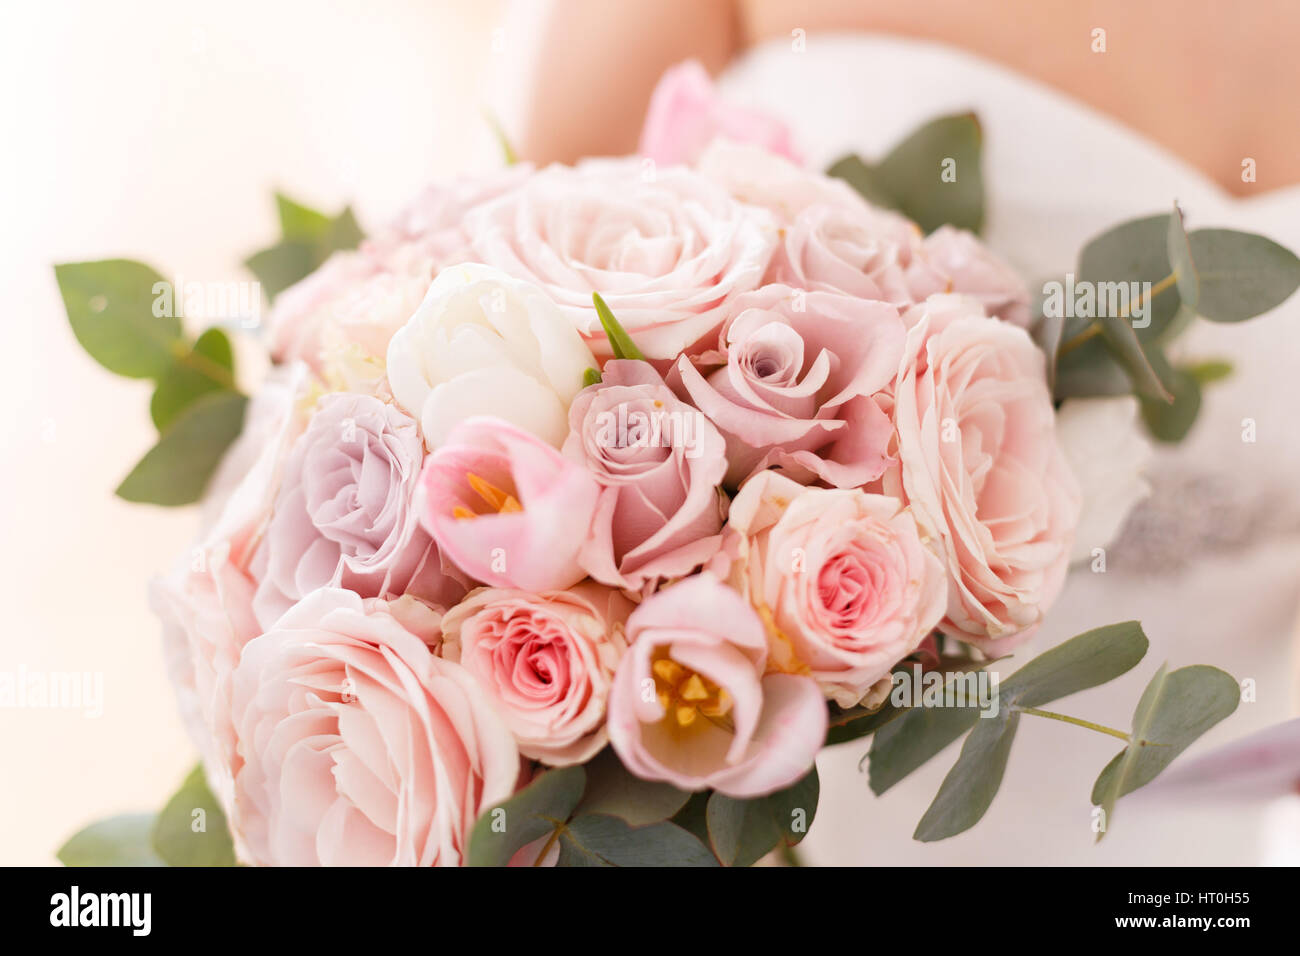 Brides bouquet of roses, tulips and eucalyptus Stock Photo